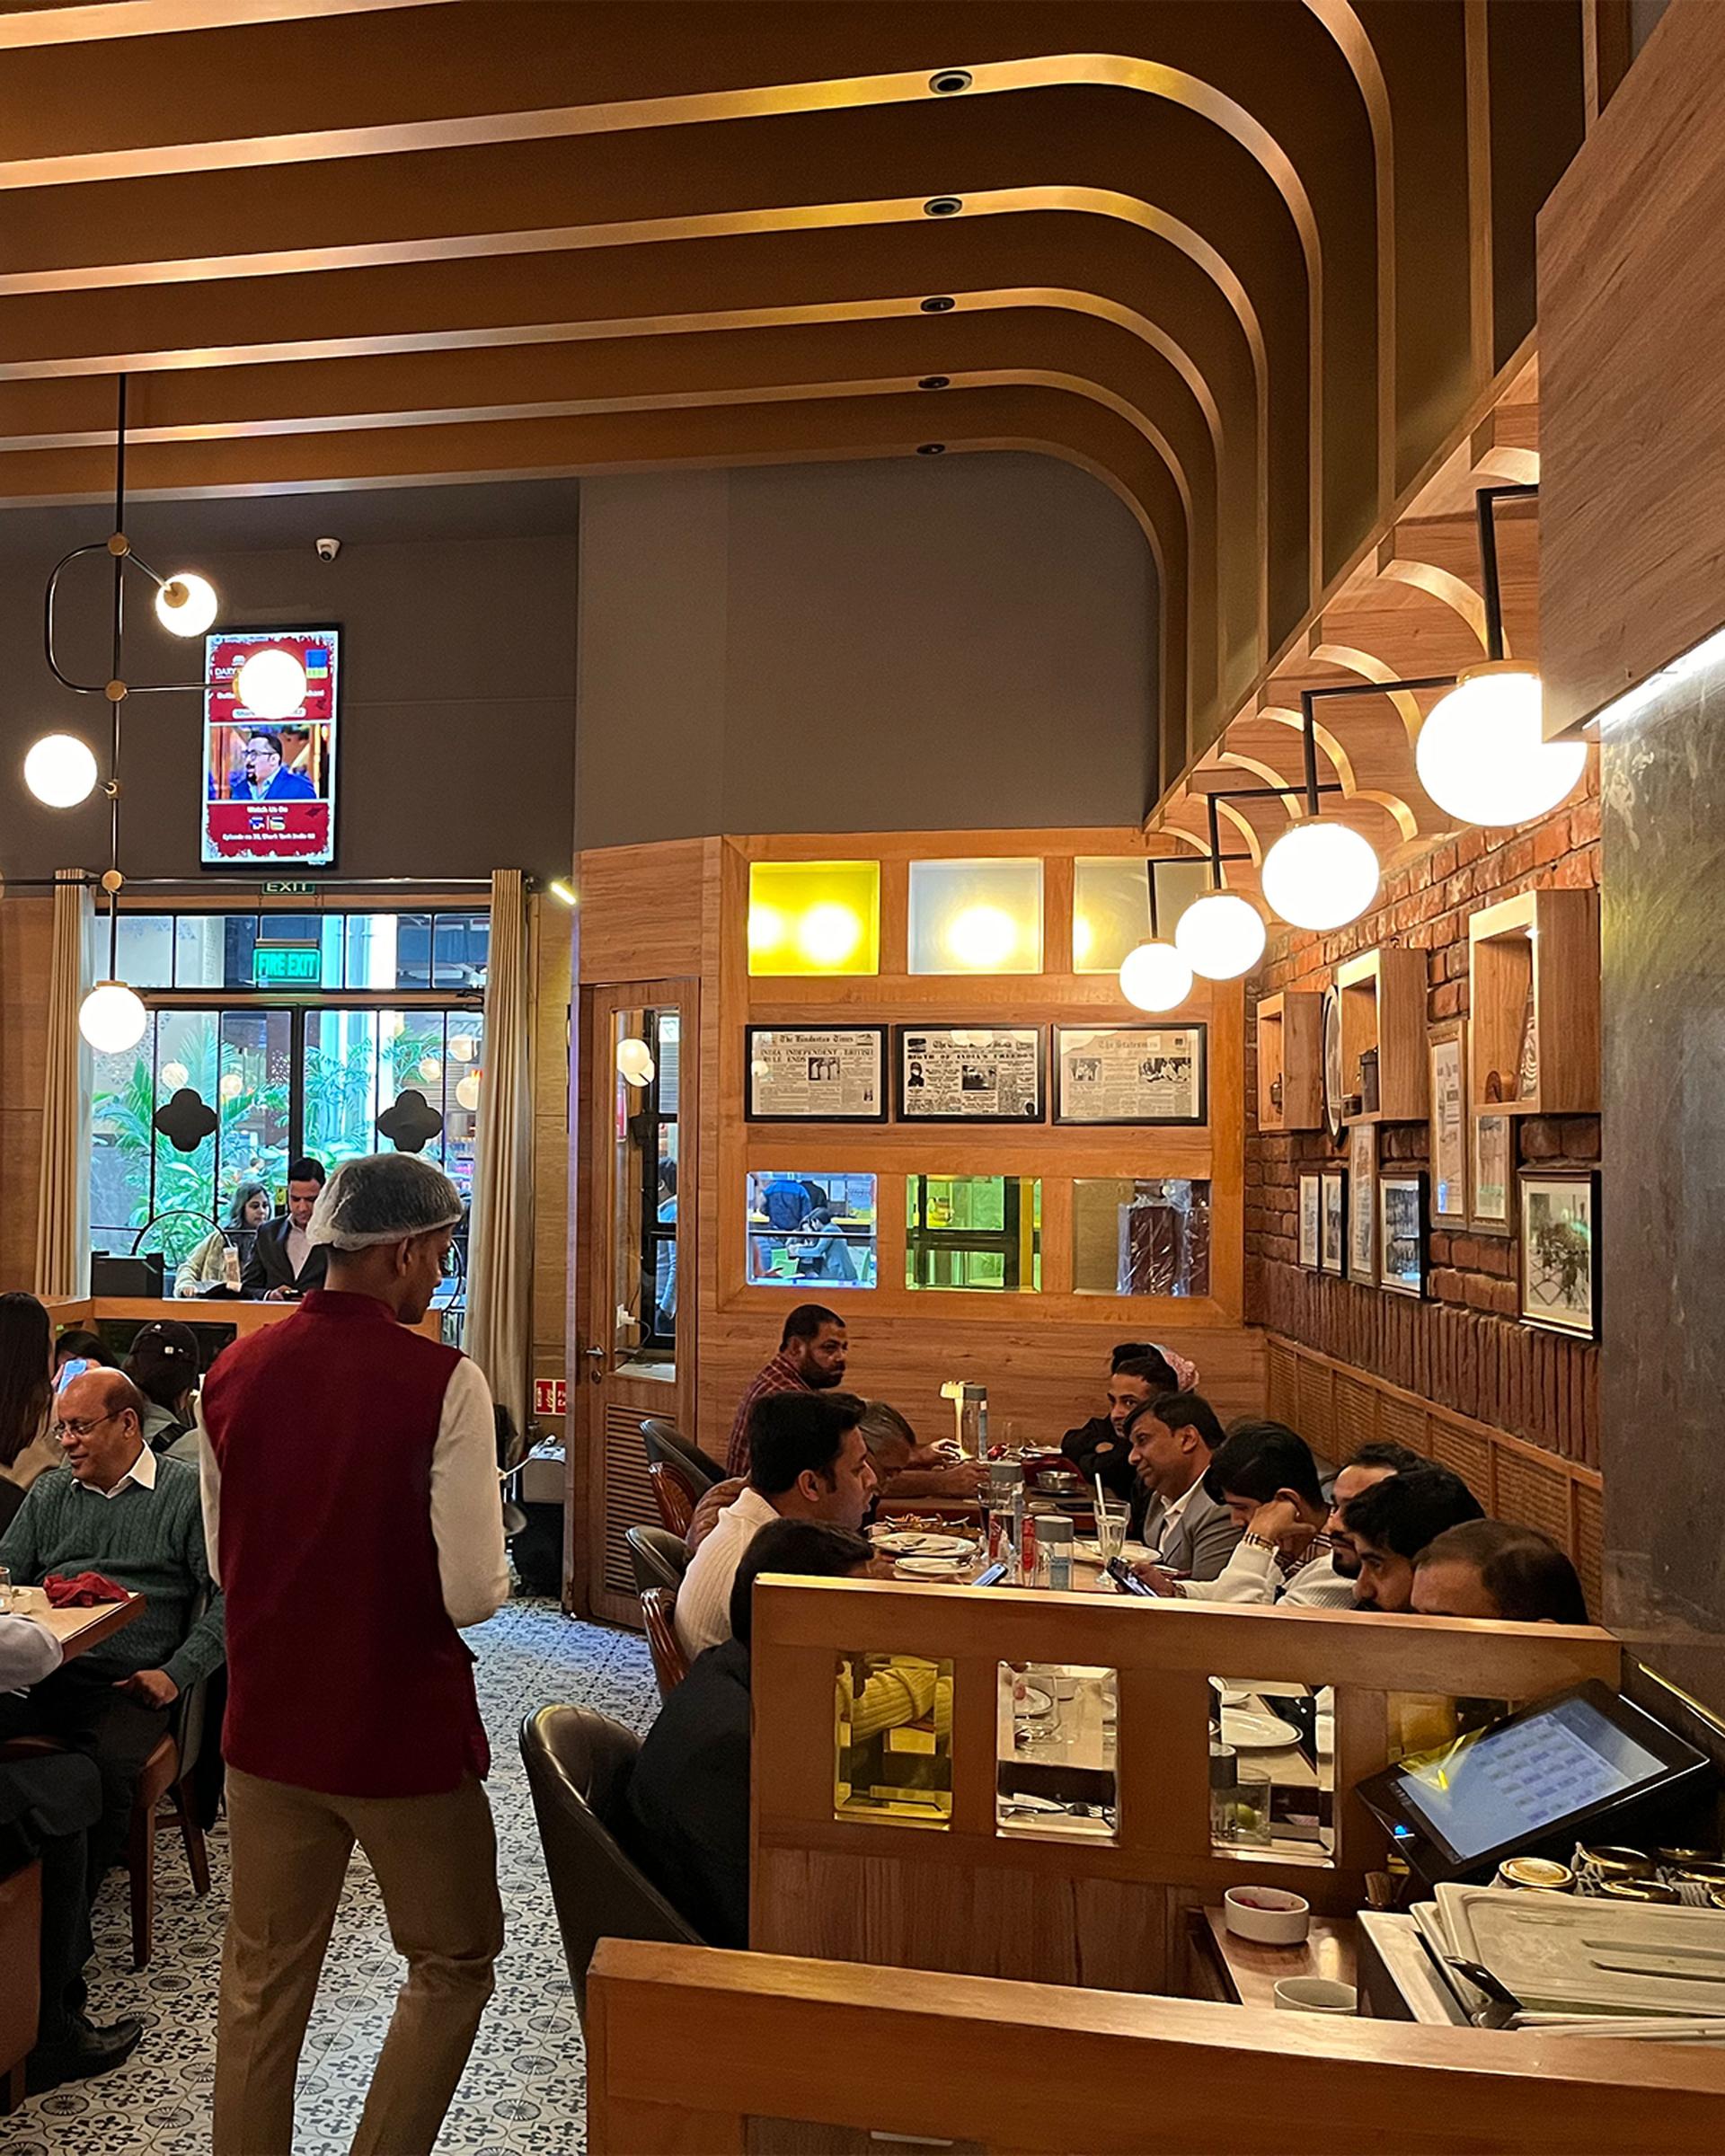 Customers are served lunch at the Daryaganj restaurant. It claims to own the original butter chicken recipe, but has been sued for copyright infringement by a rival Delhi restaurant.